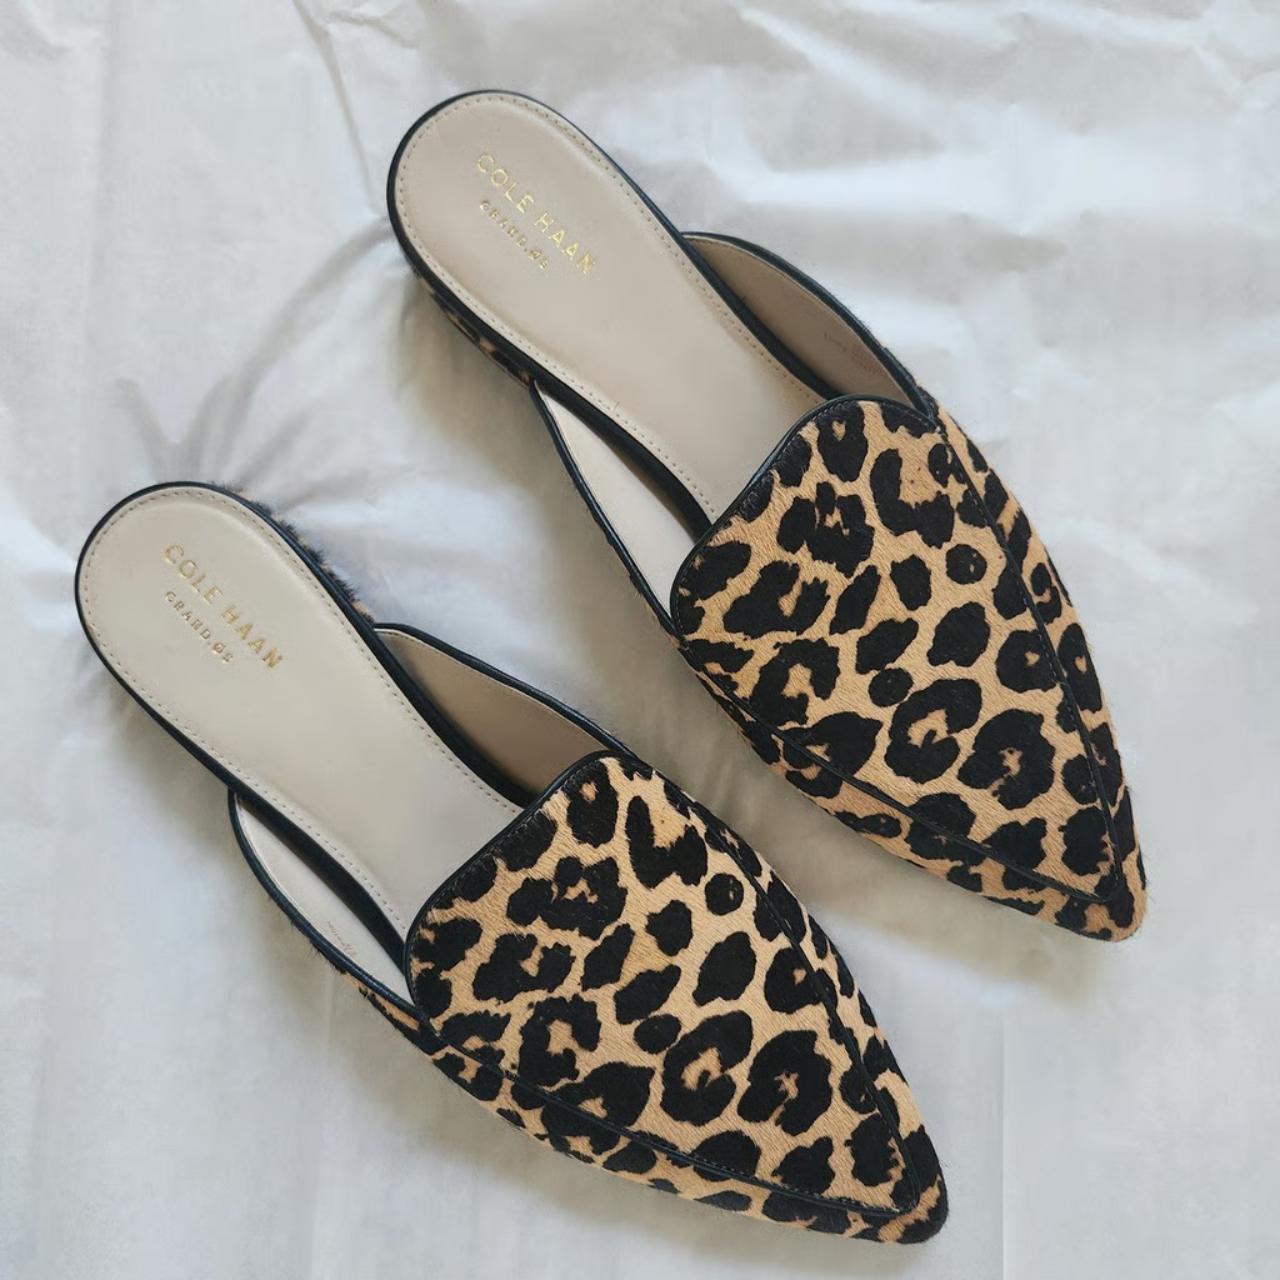 Cole Haan Piper Leopard Print Calf Hair Loafer Mules